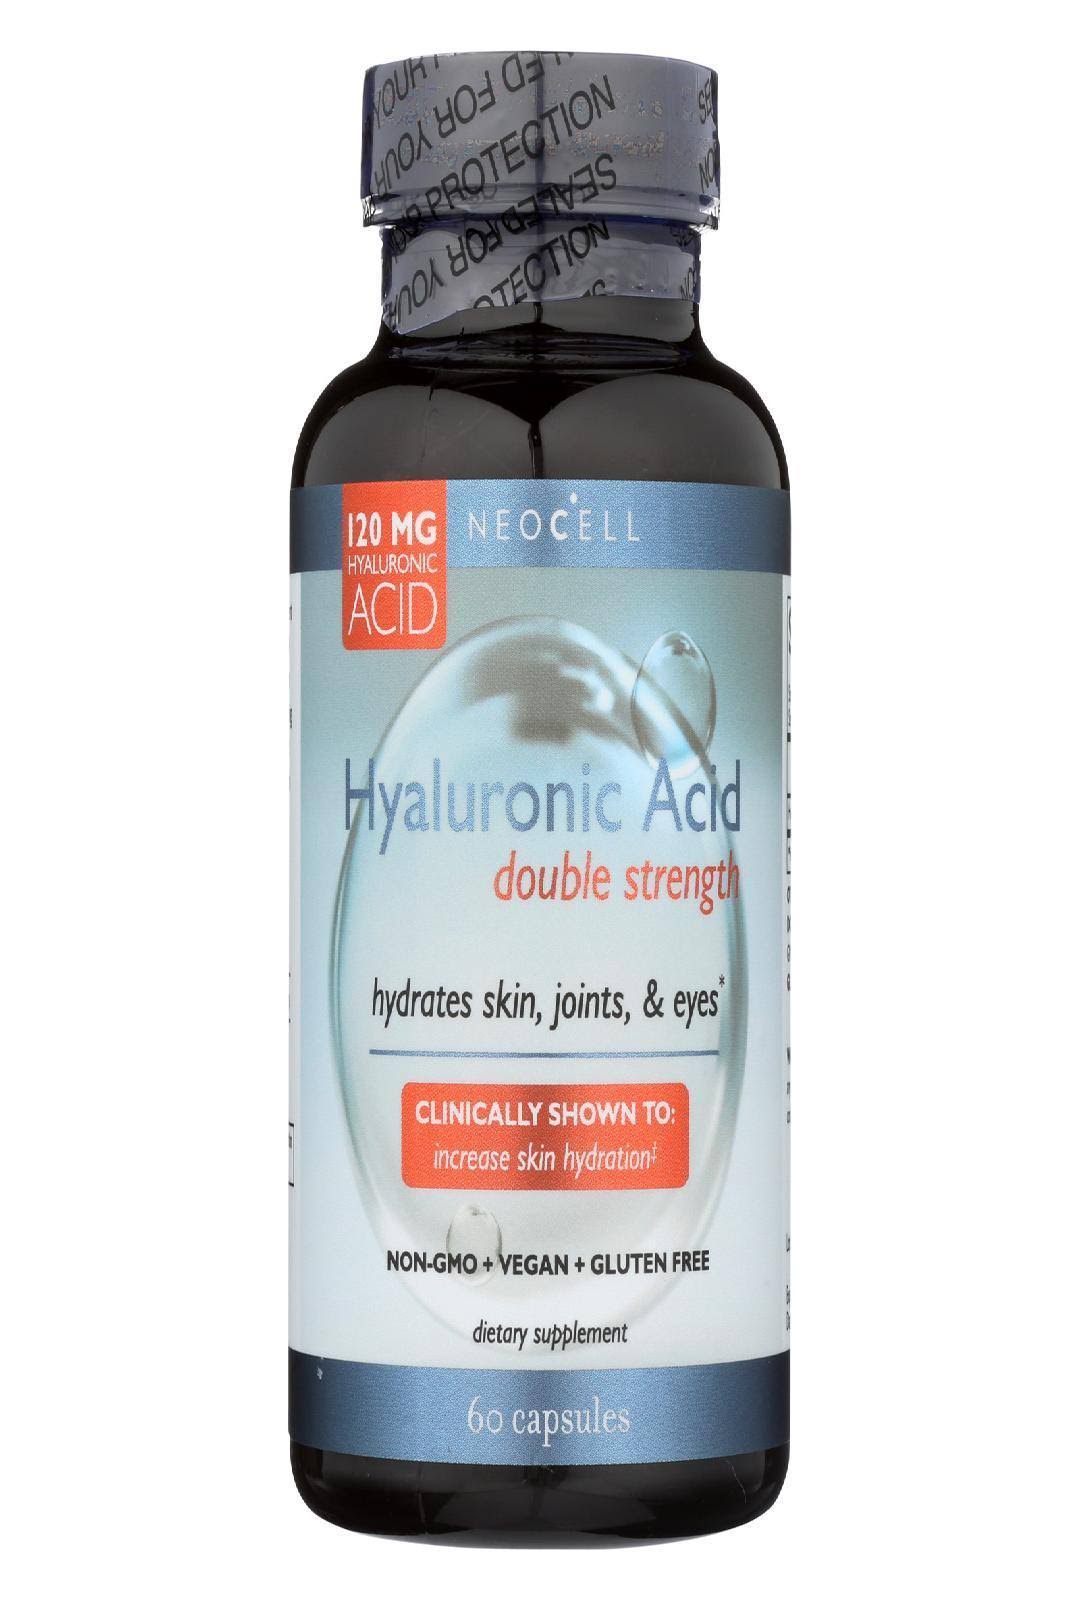 NeoCell Hyaluronic Acid Double Strength - 120mg, 60 ct